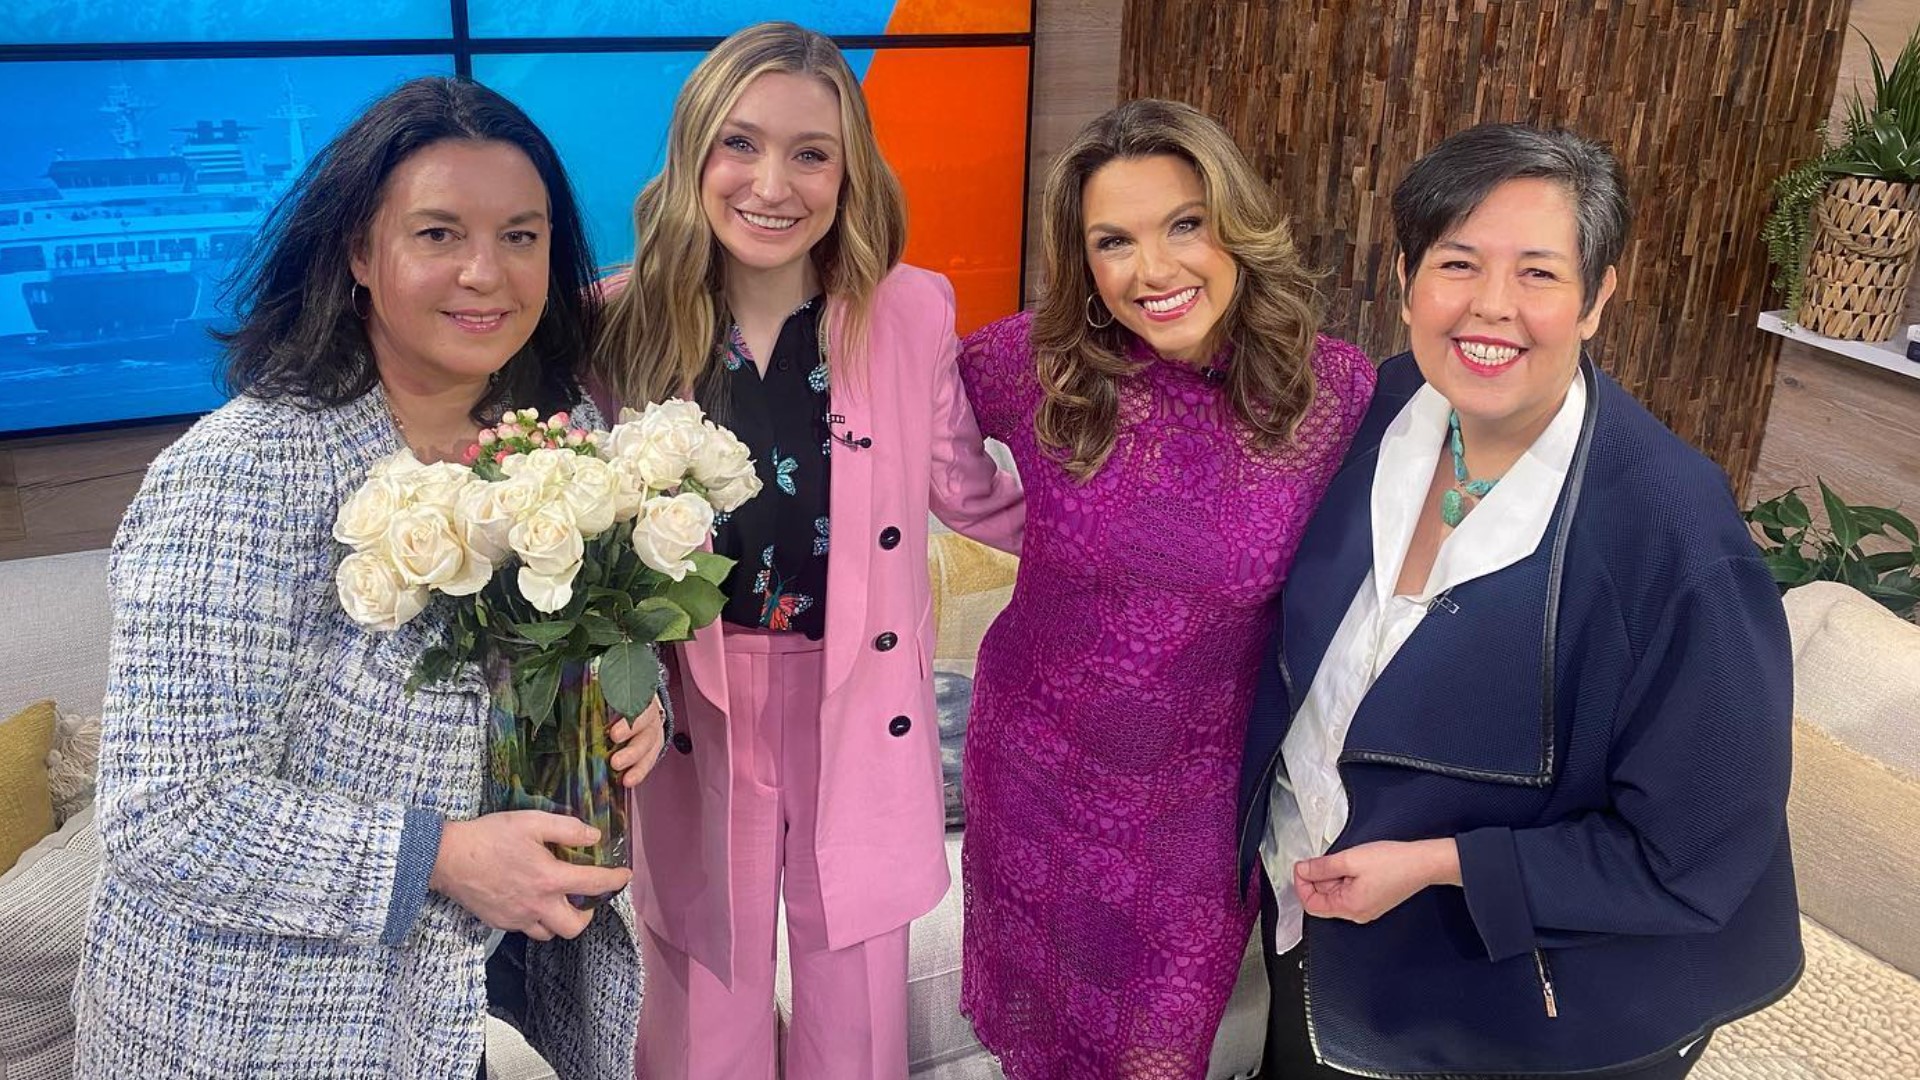 We celebrated International Women's Day by chatting with some of our favorite women including Suzie Wiley, Roberta Romero, and Darcy Camden. #newdaynw